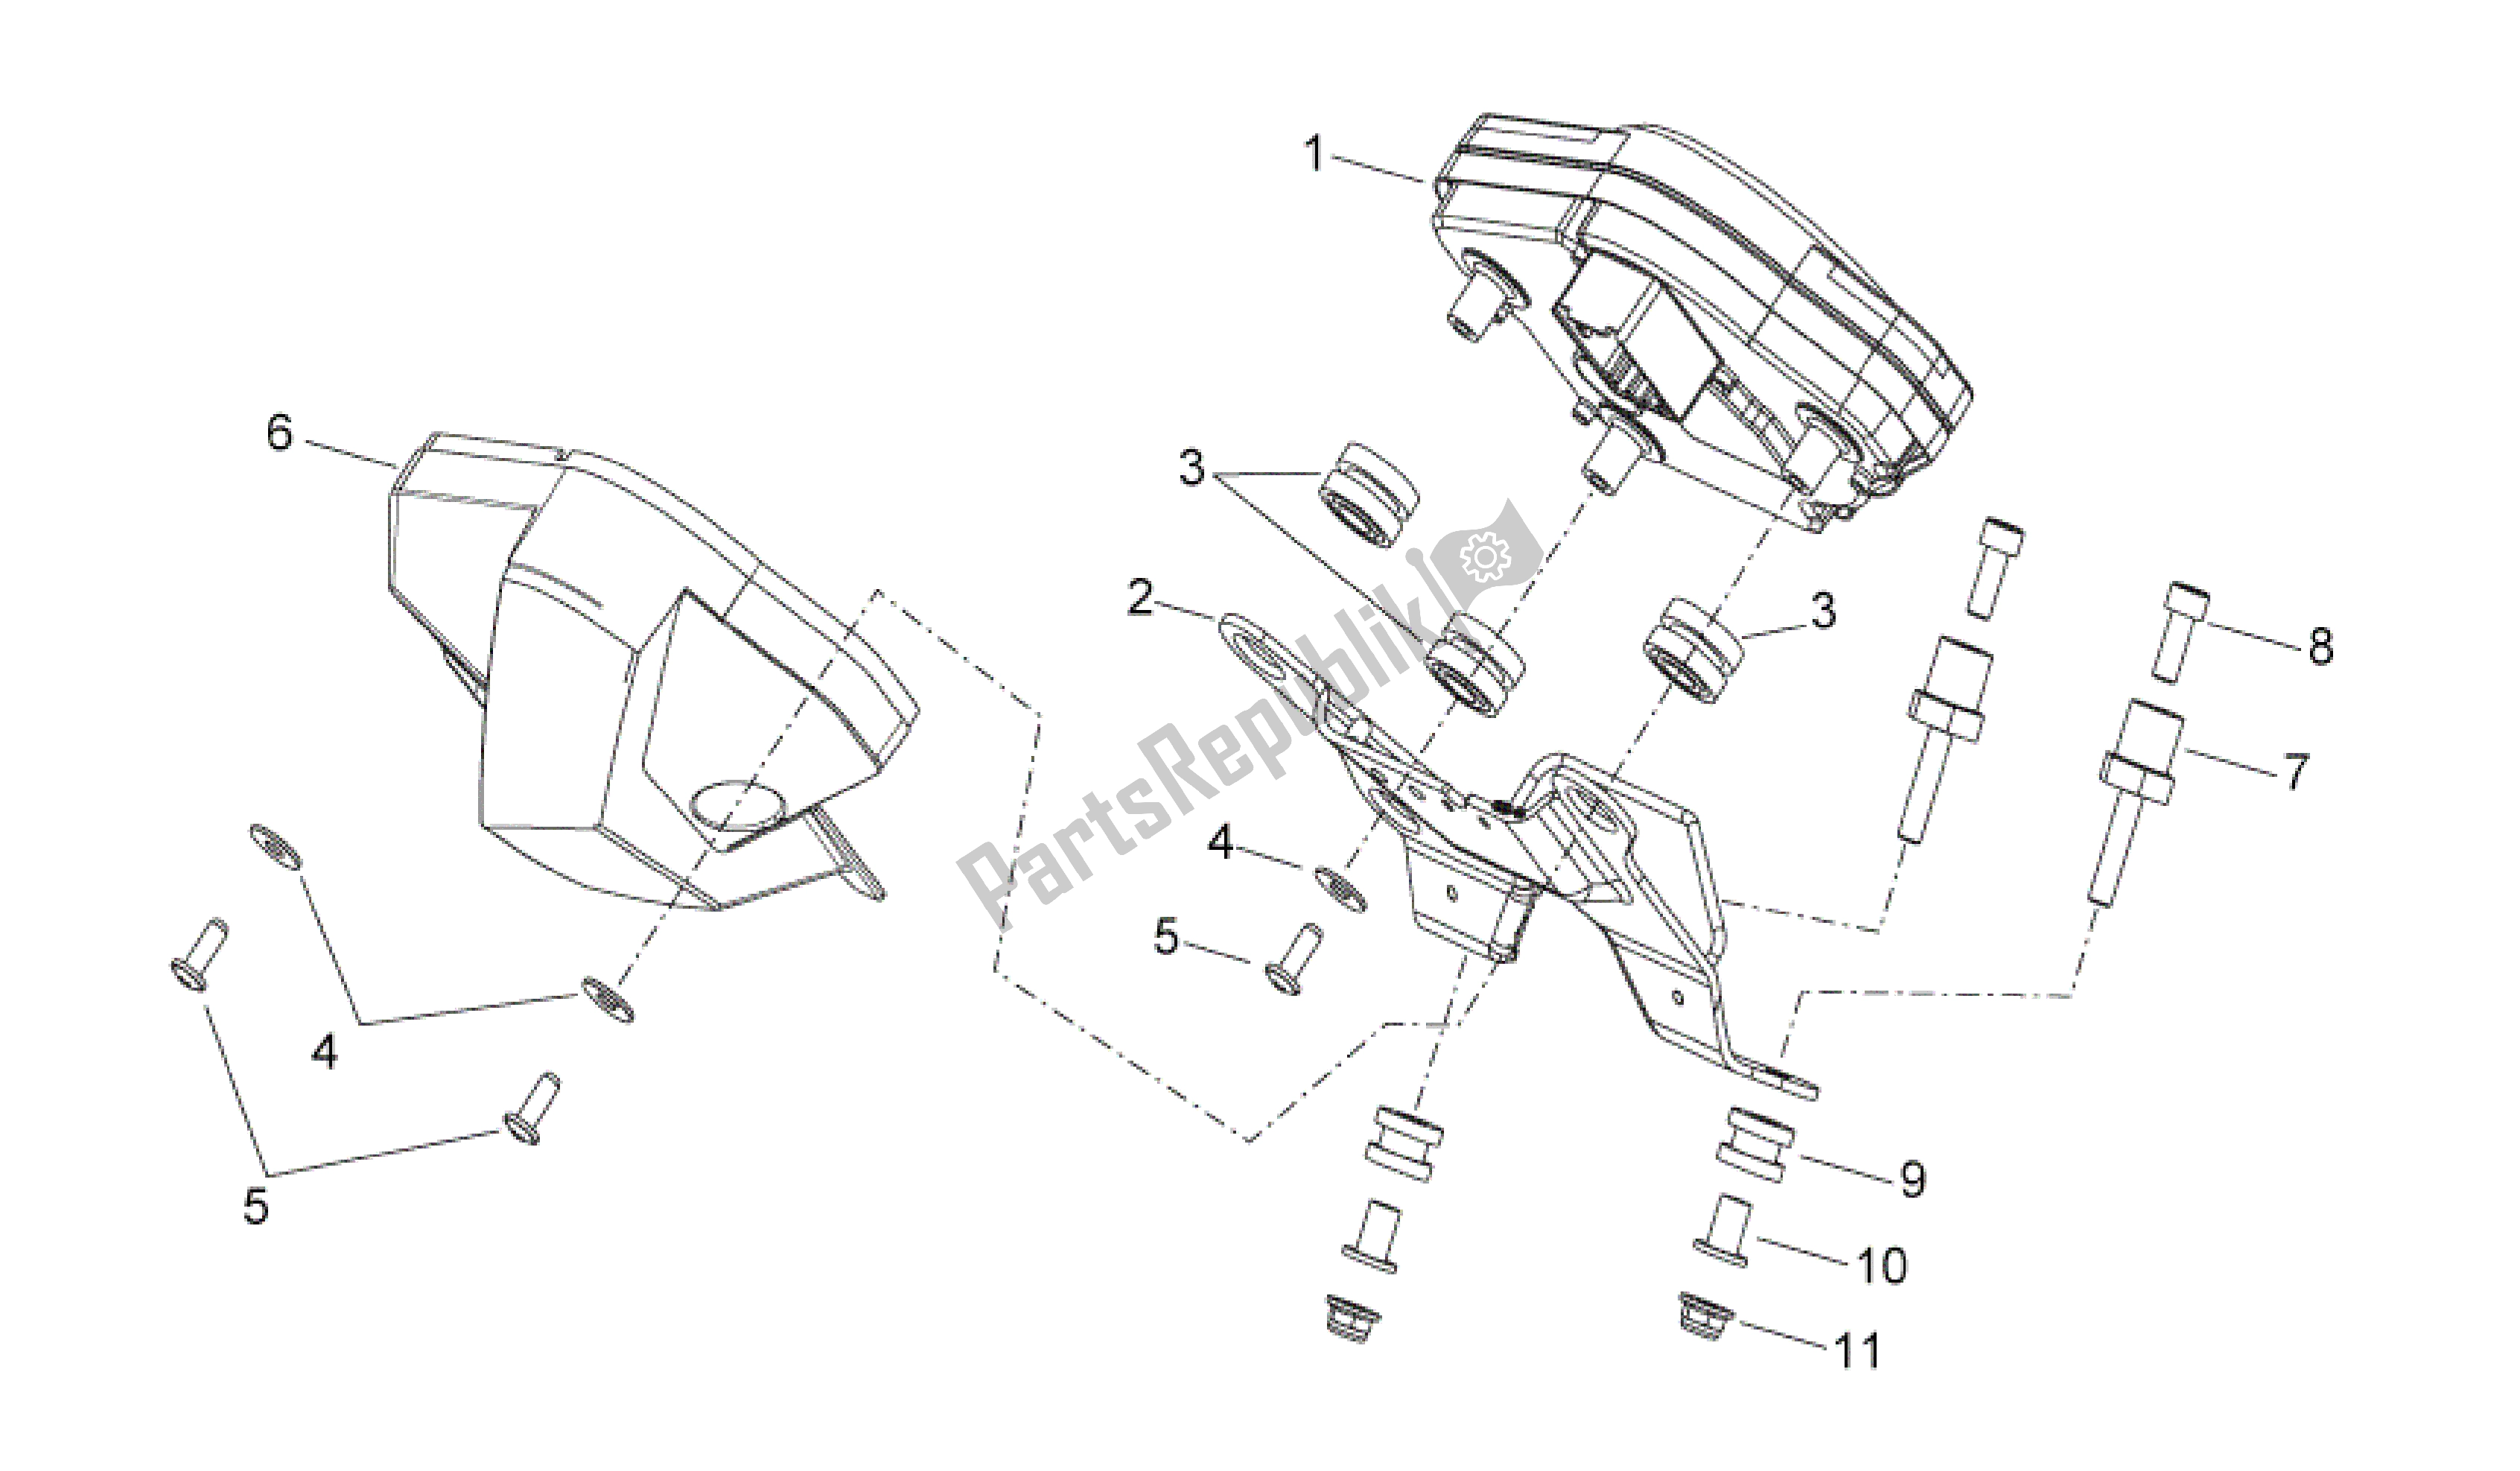 All parts for the Dashboard of the Aprilia Shiver 750 2011 - 2013